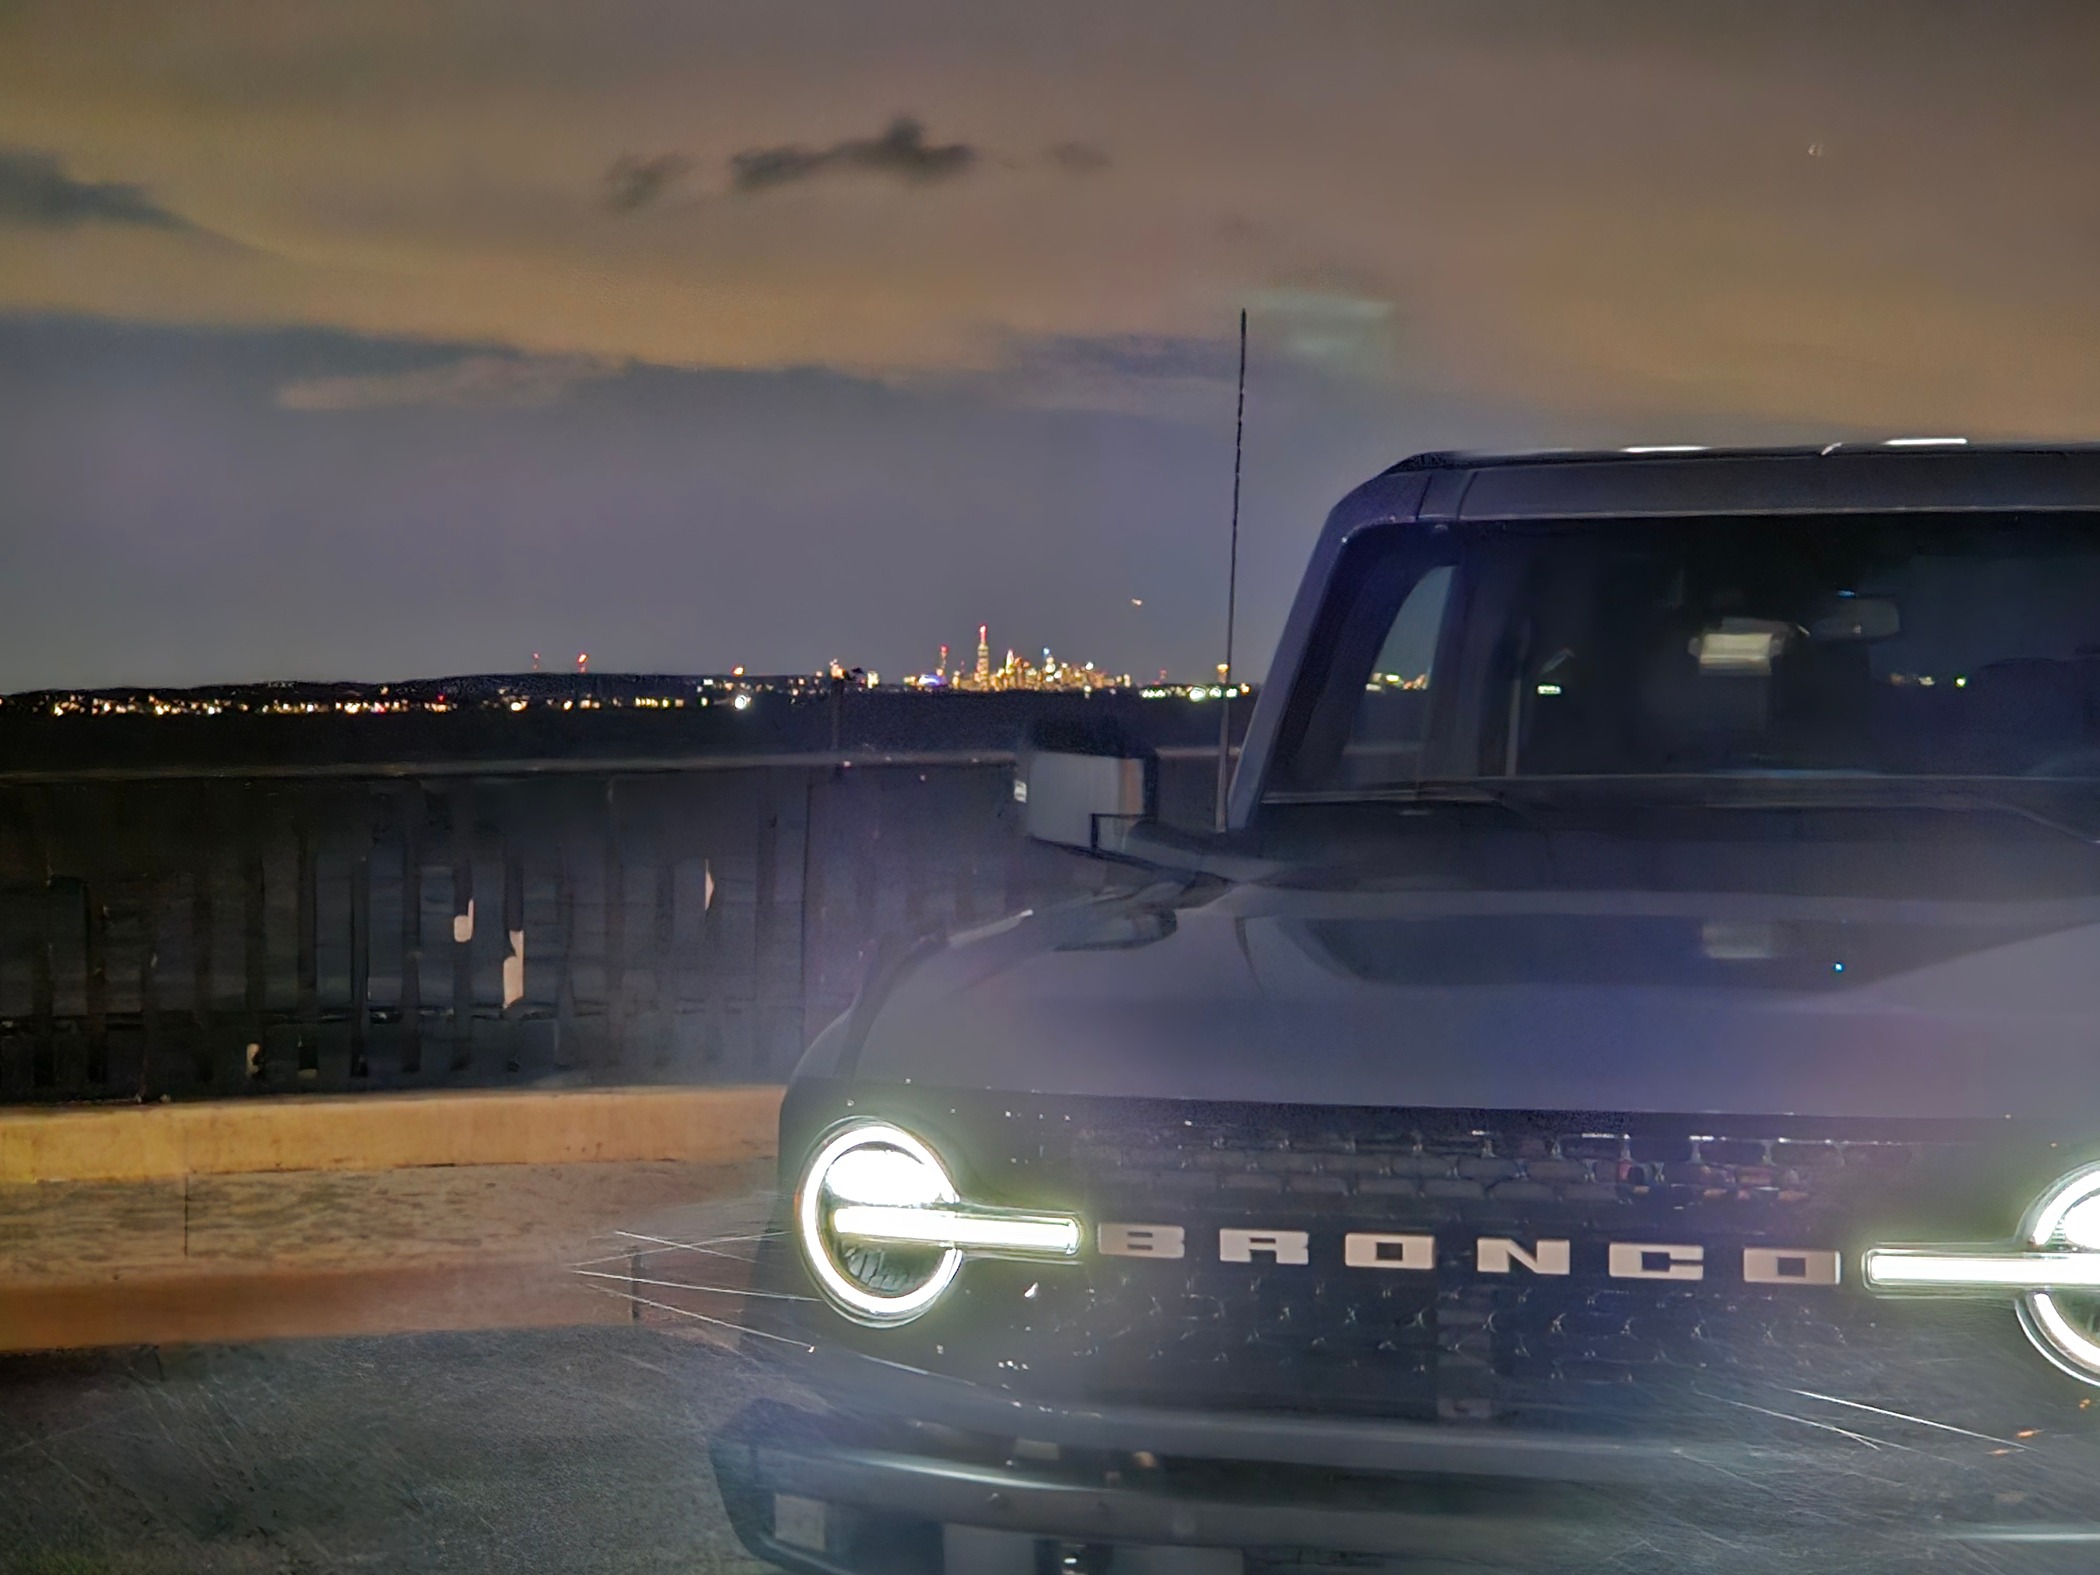 Ford Bronco First official photo - what’s yours? 1000005937